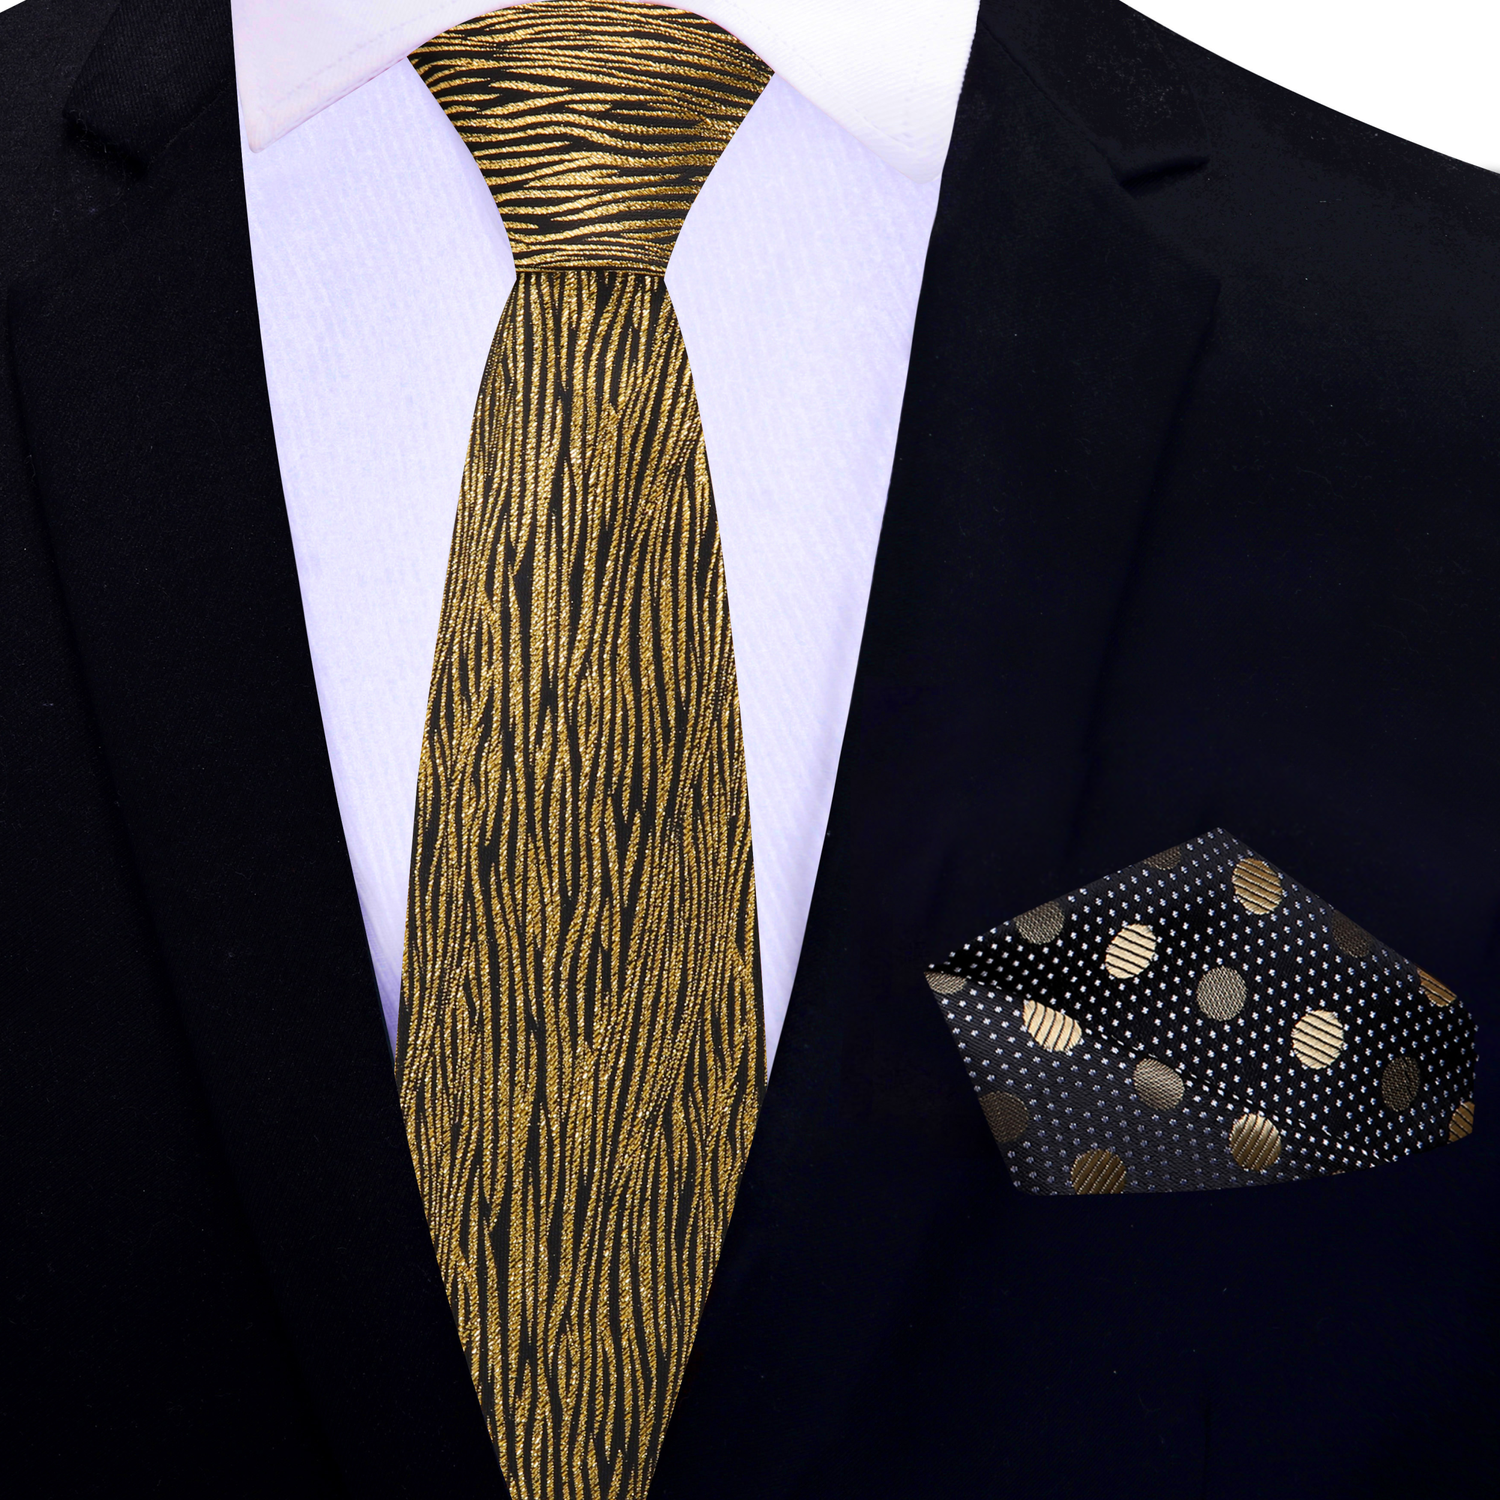 Thin Tie: Black and Gold Zebra Tie and Accenting Black Gold Polka Pocket Square